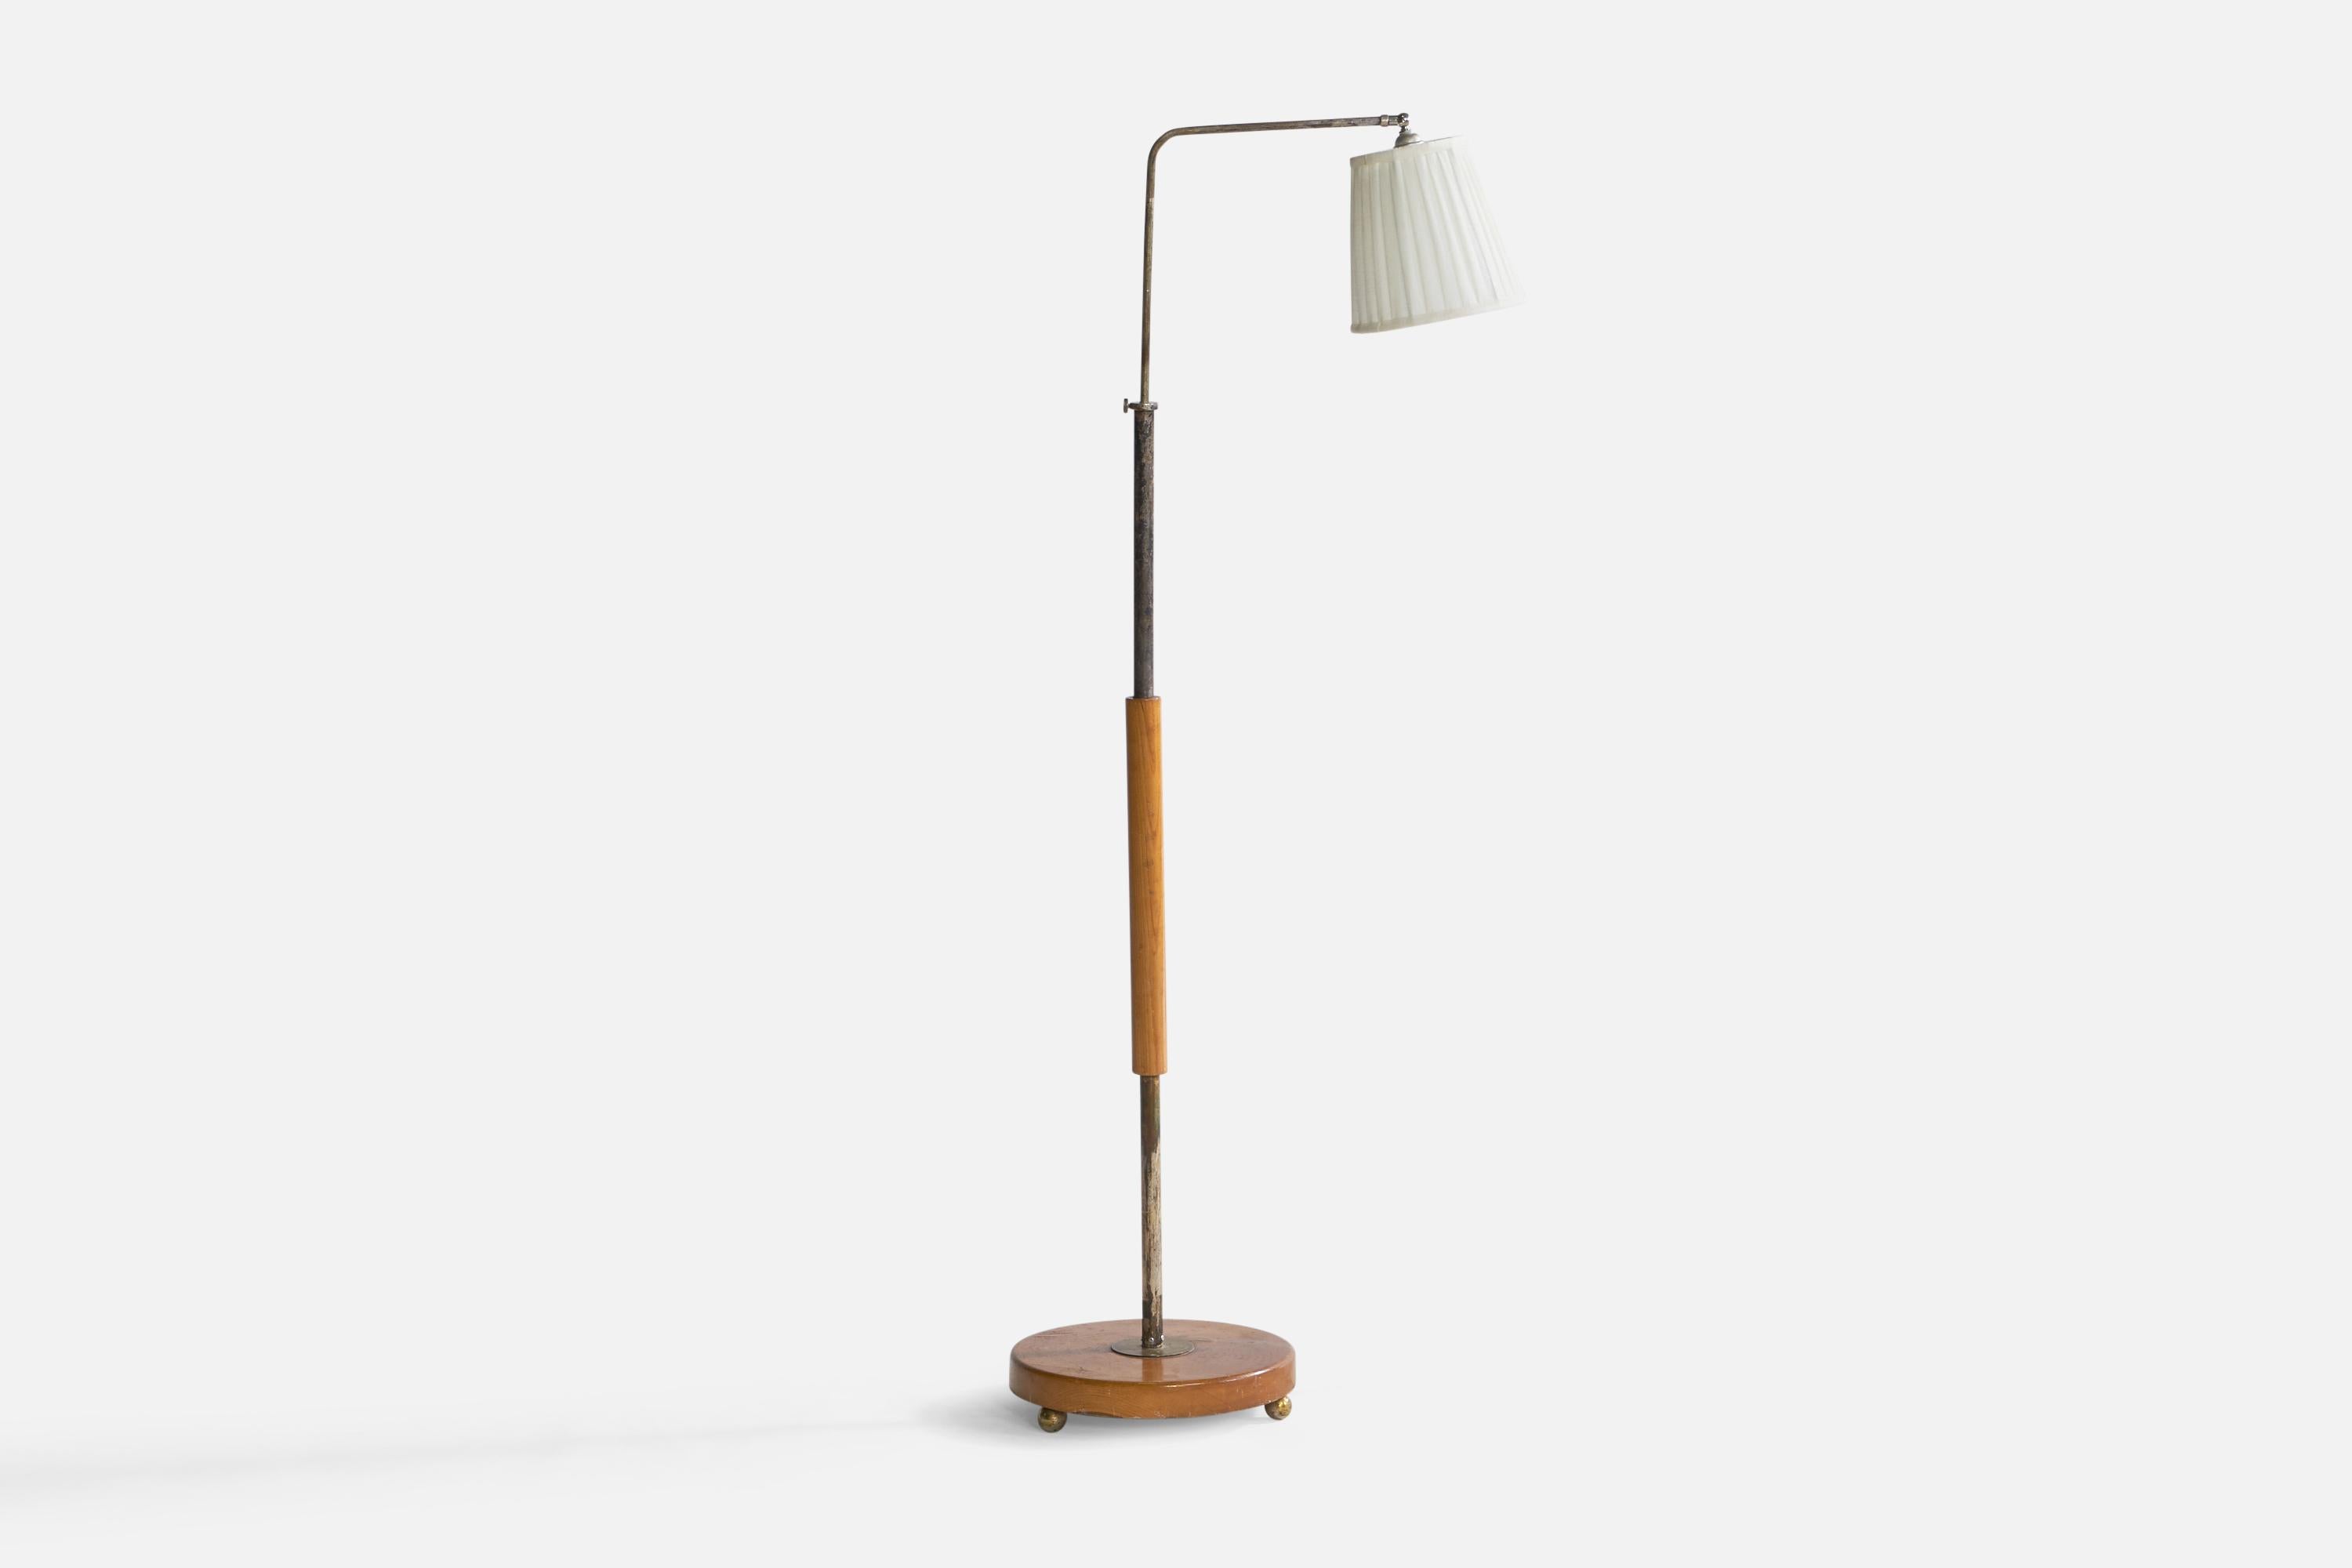 An adjustable brass, steel oak and white fabric floor lamp designed and produced in Sweden, 1930s.

Overall Dimensions (inches): 56.25” H x 13.5 x 23.8” Diameter. Stated dimensions include shade.
Dimensions vary based on height and angle of